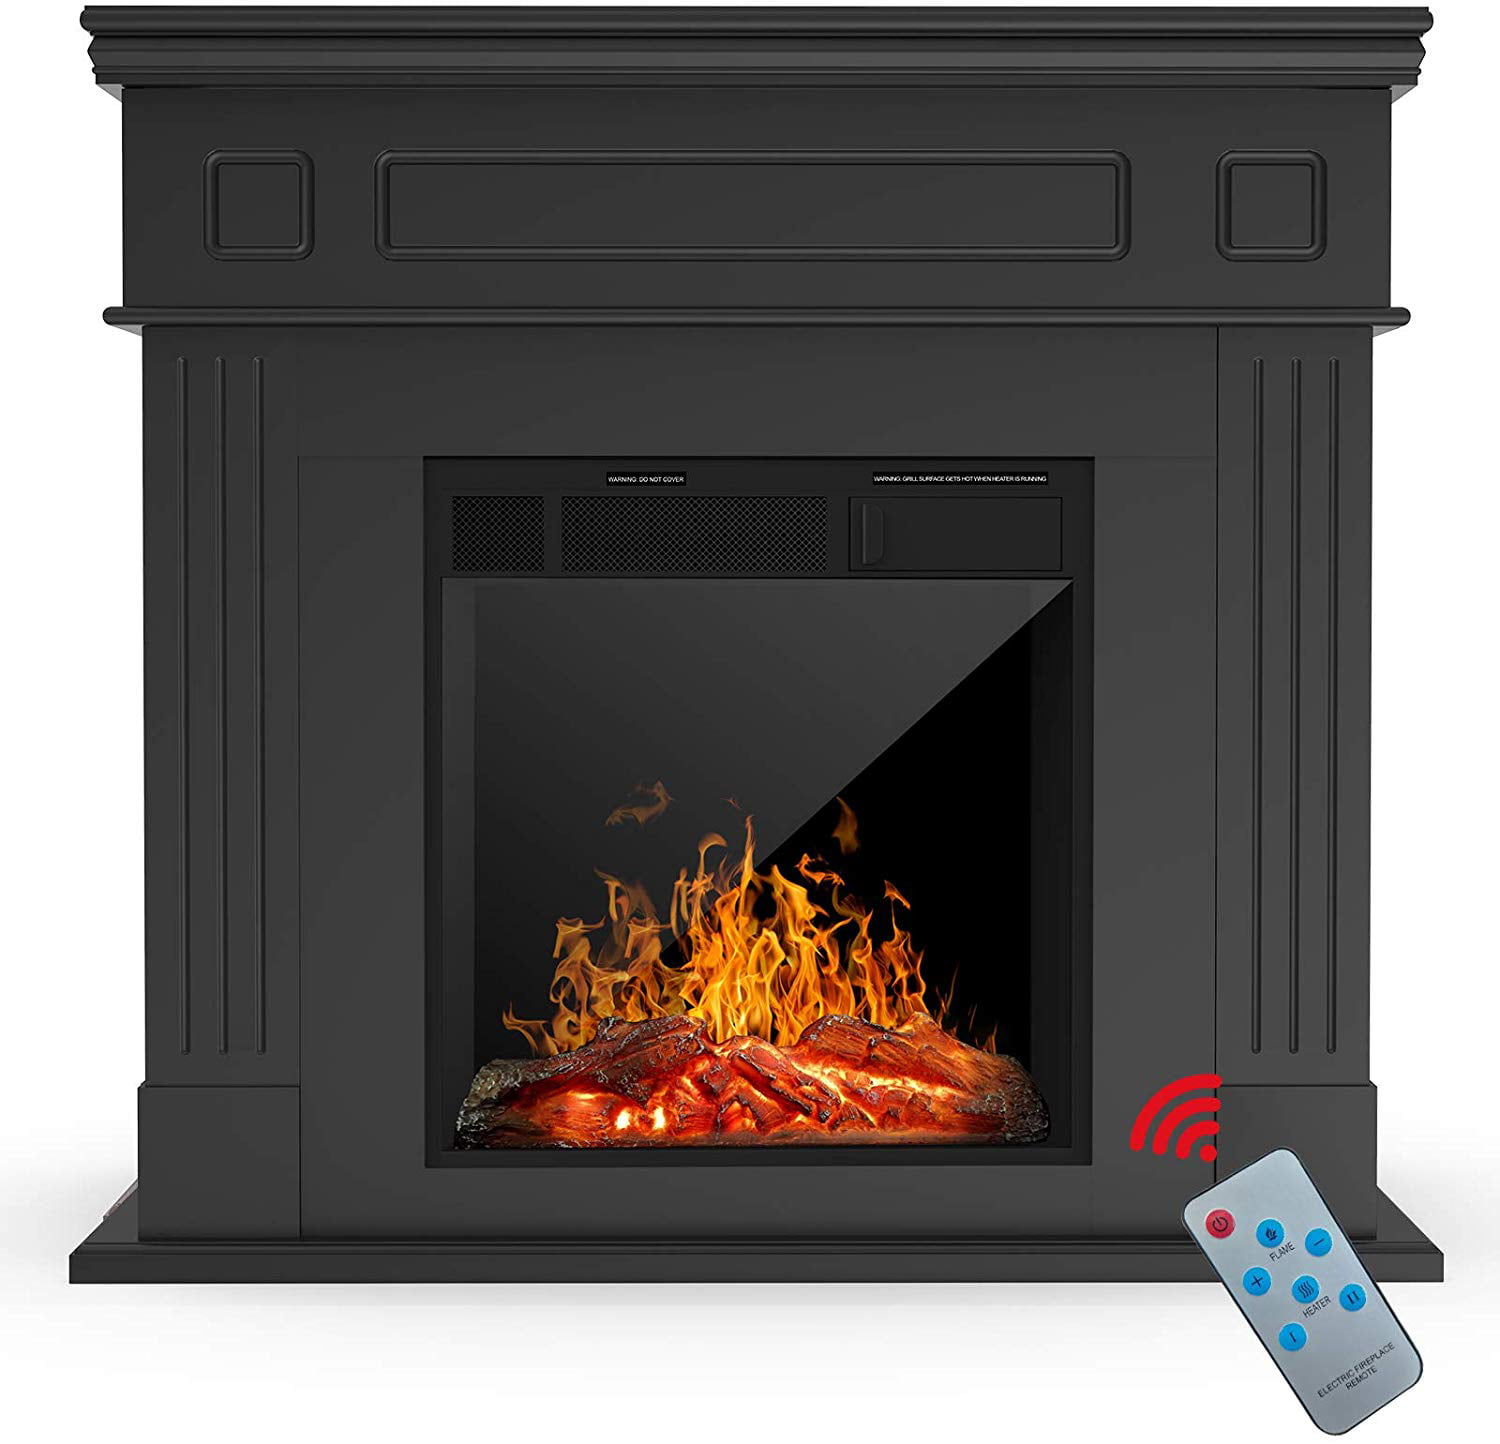 Freestanding Electric Fireplace Mantel Package Heater Log Hearth with Realistic Flame and Remote Control KUPPET Electric Fireplace